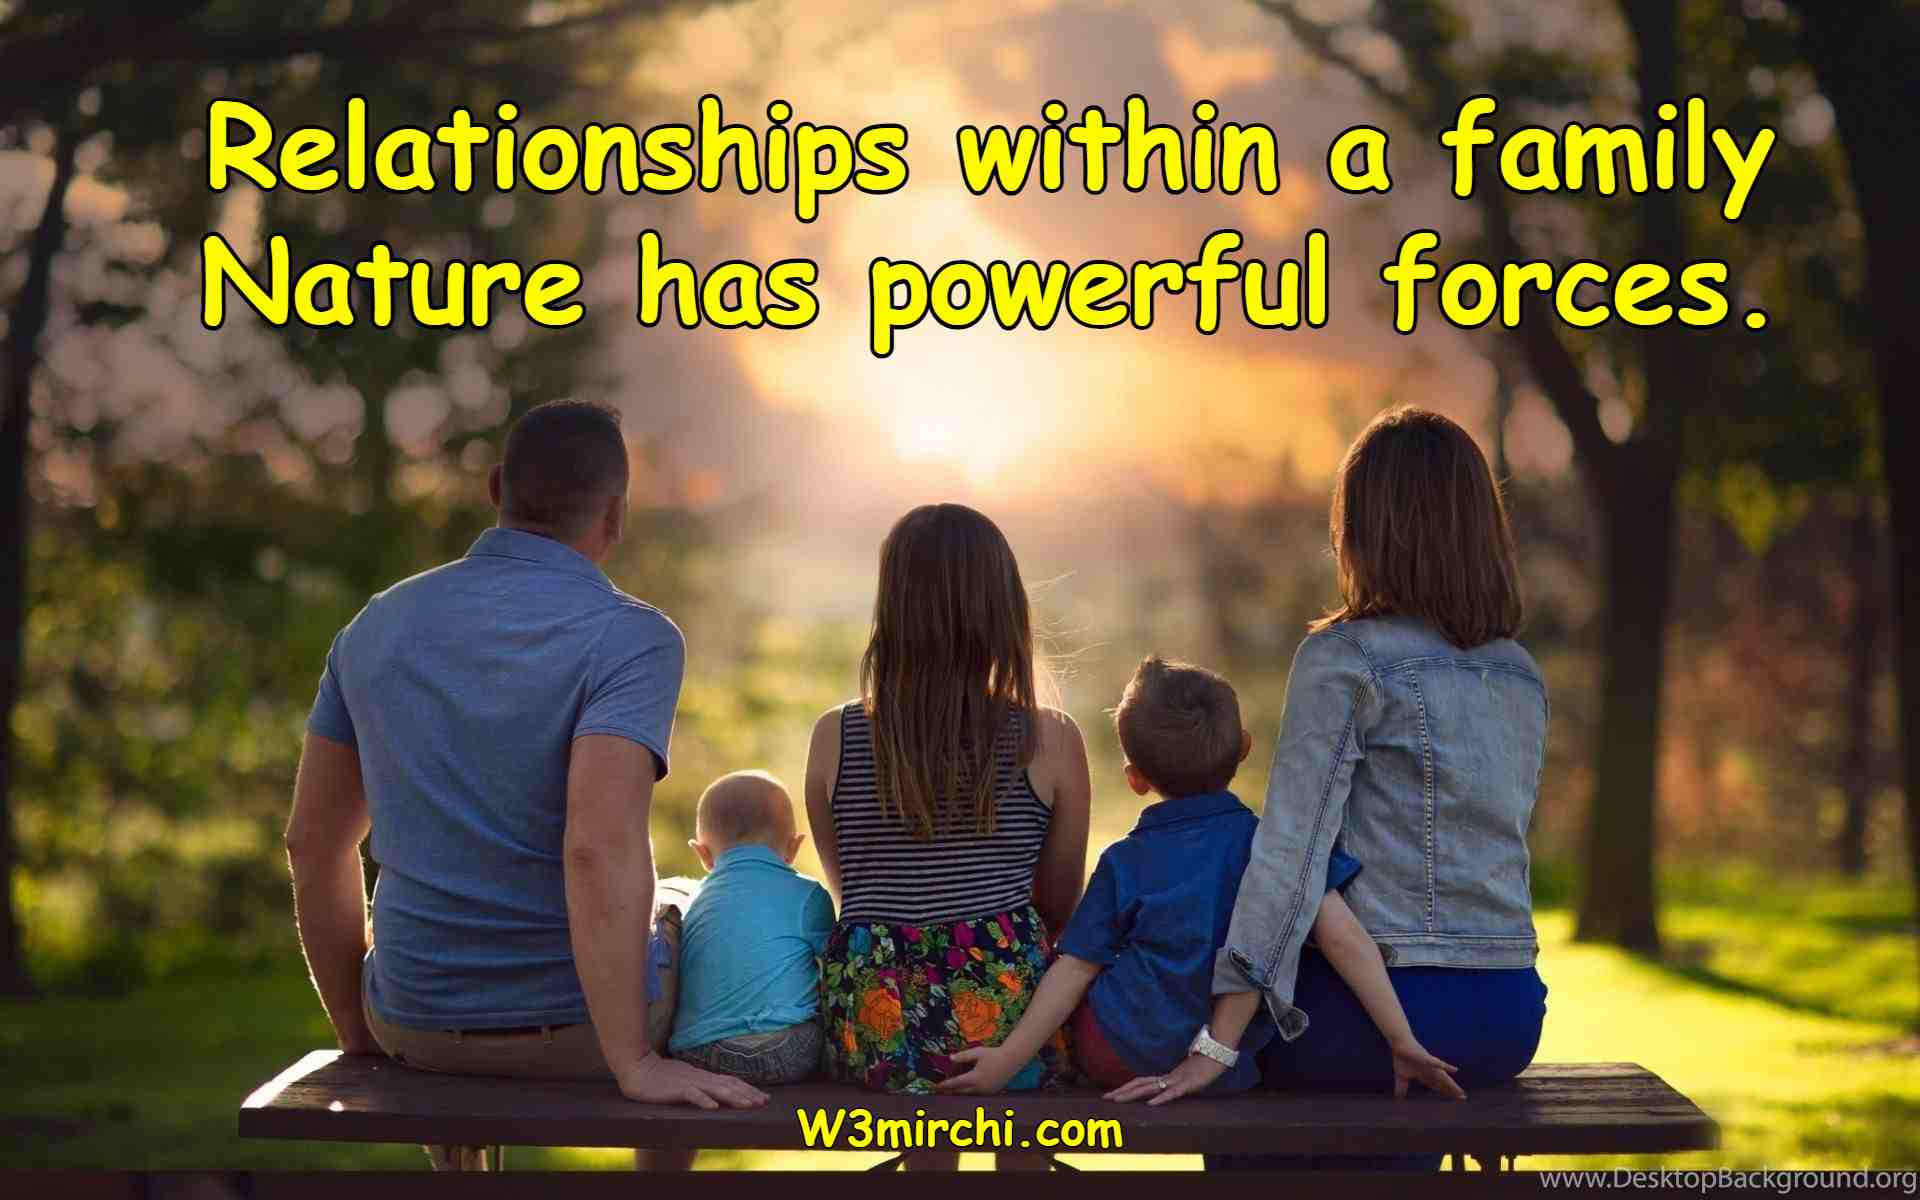 Relationships within a family